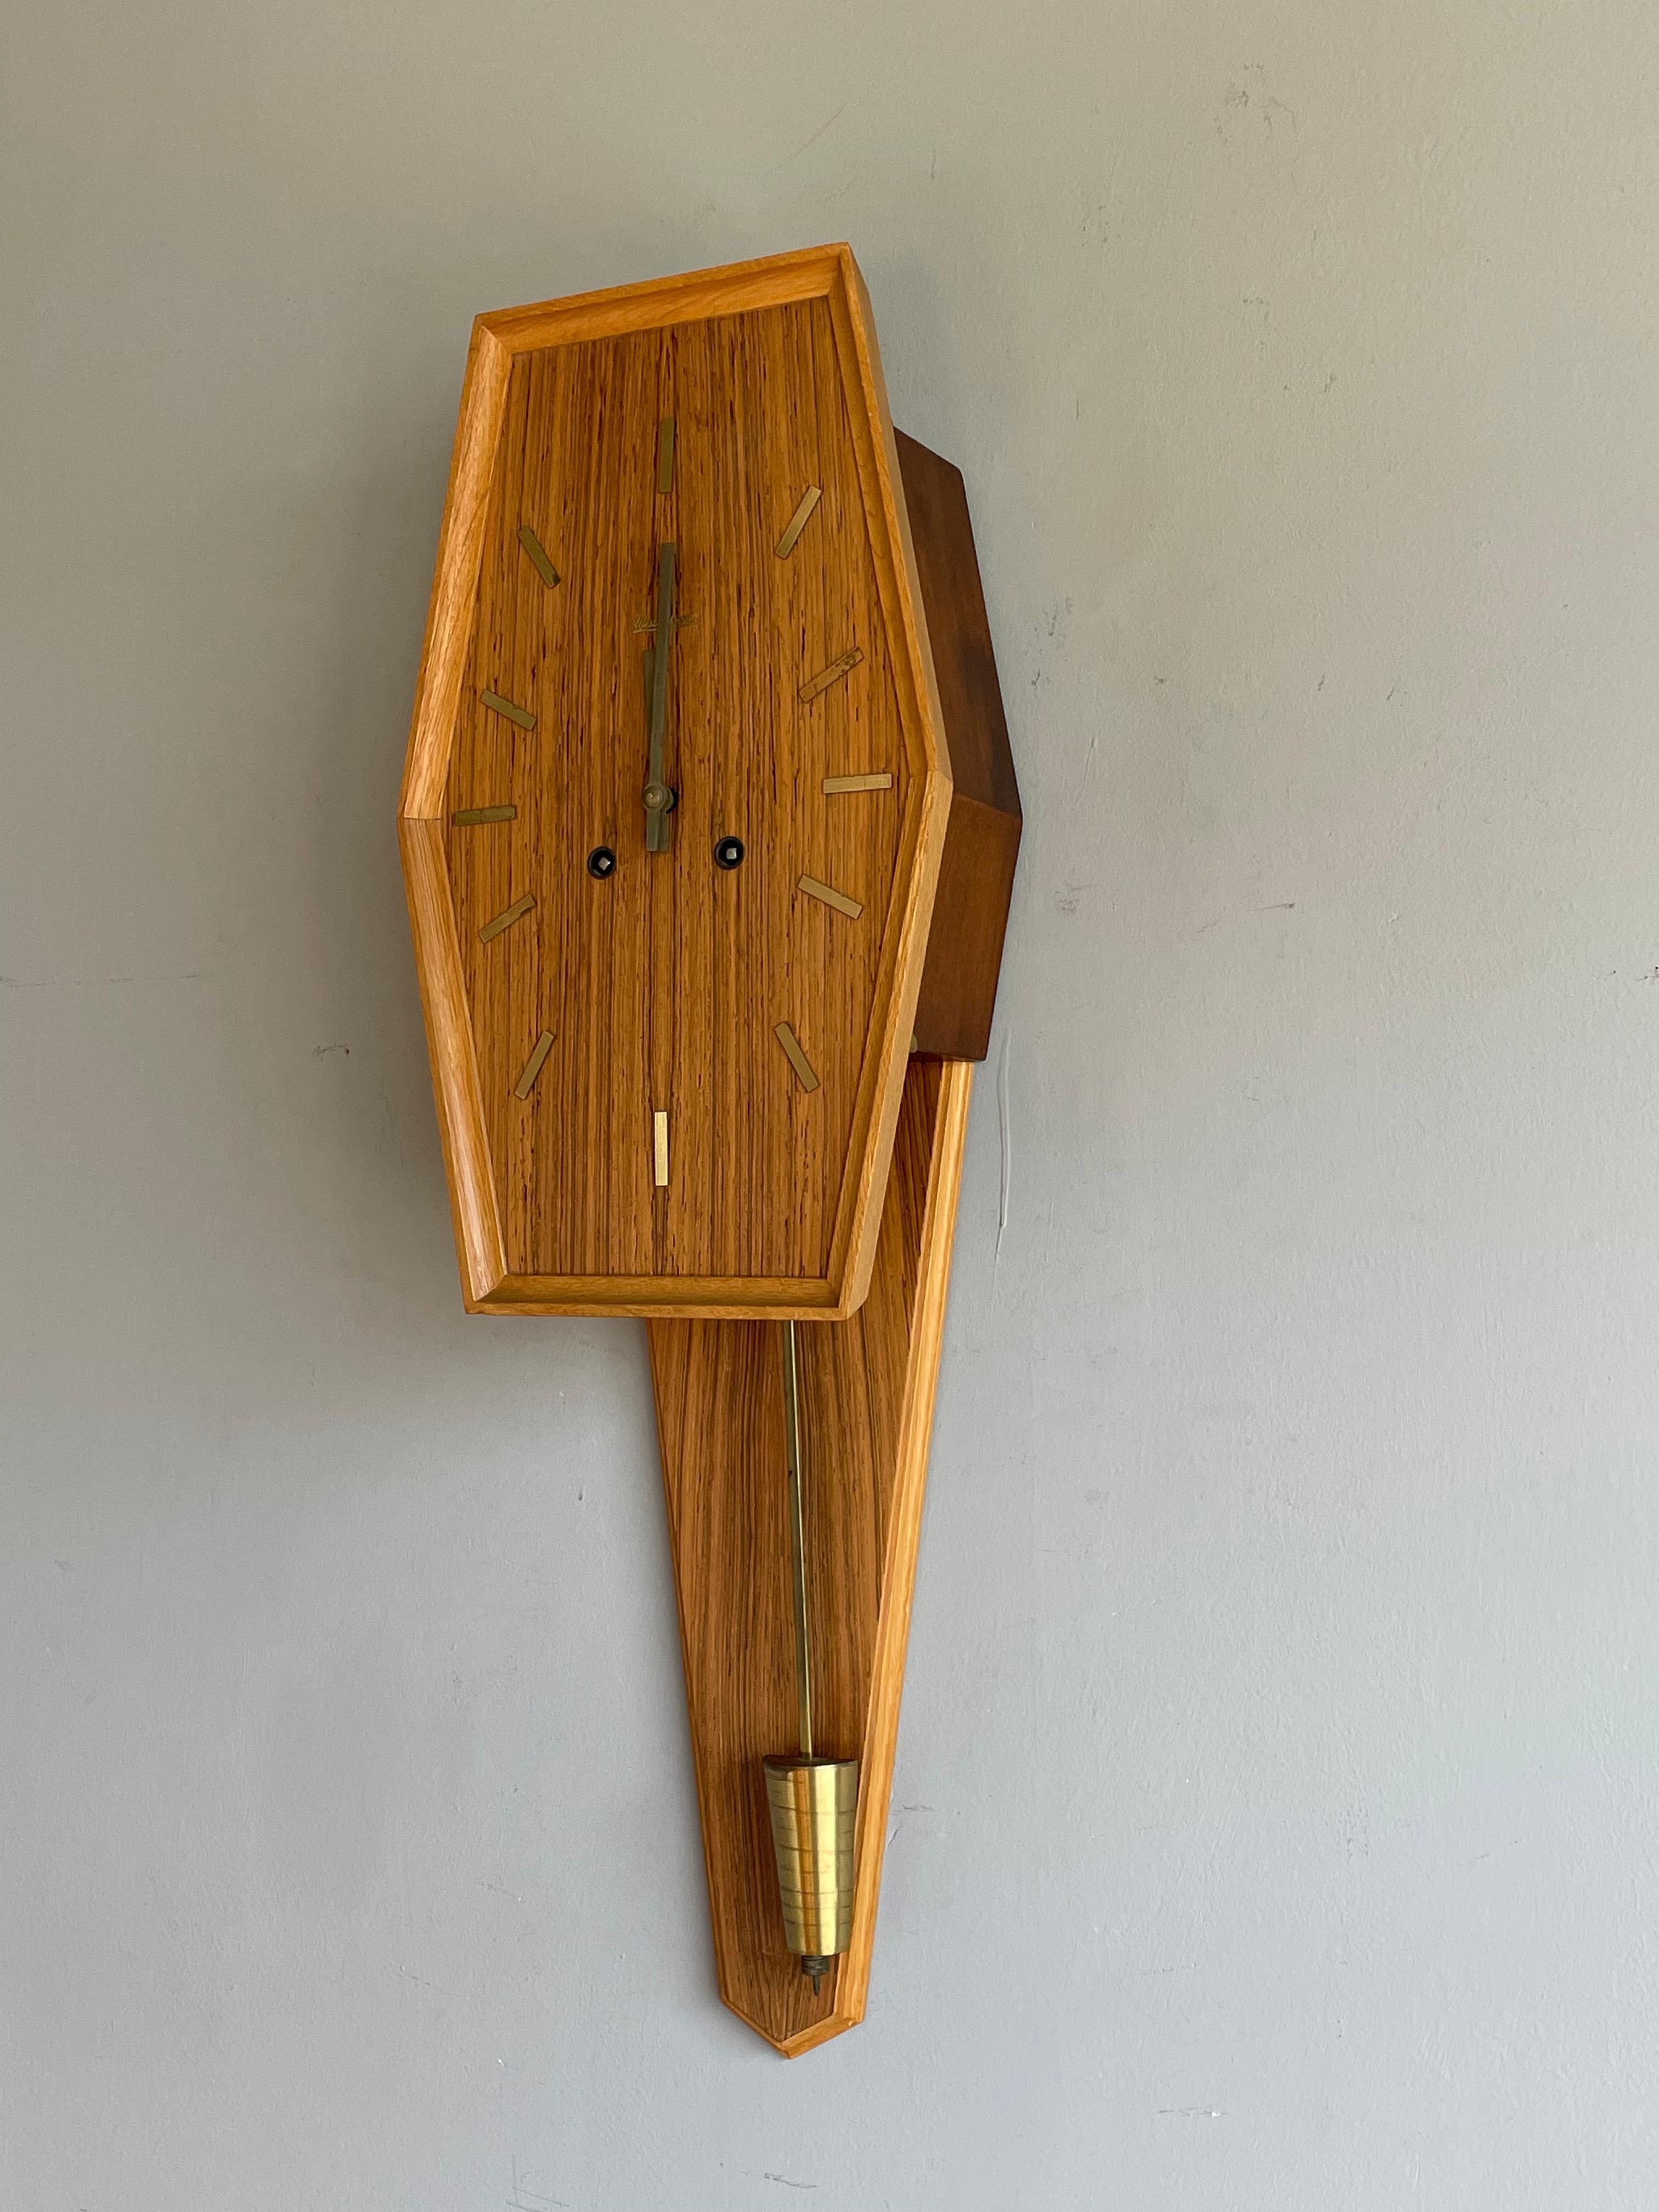 Beautiful Midcentury Modern Wooden Pendulum Wall Clock By Westerstrand, Sweden For Sale 2